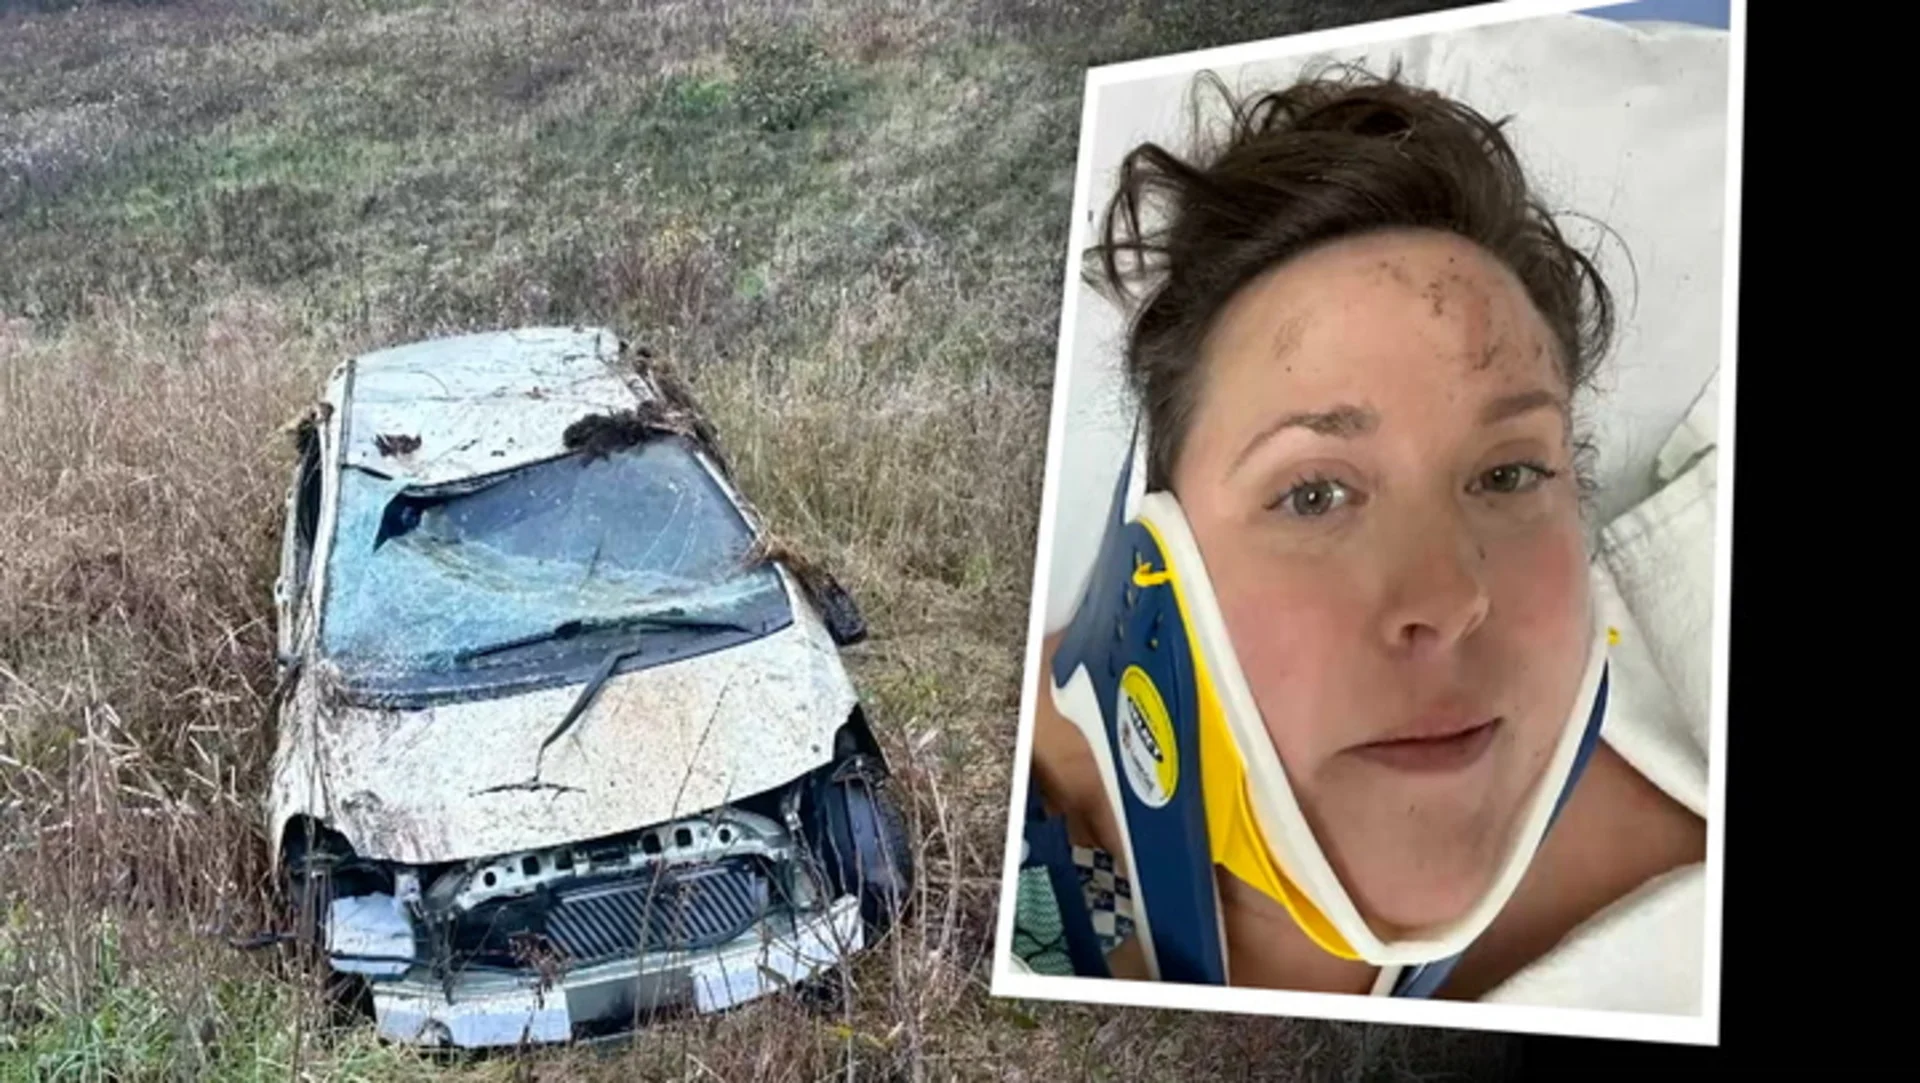 Terrifying black ice accident prompts influencer to share safety message